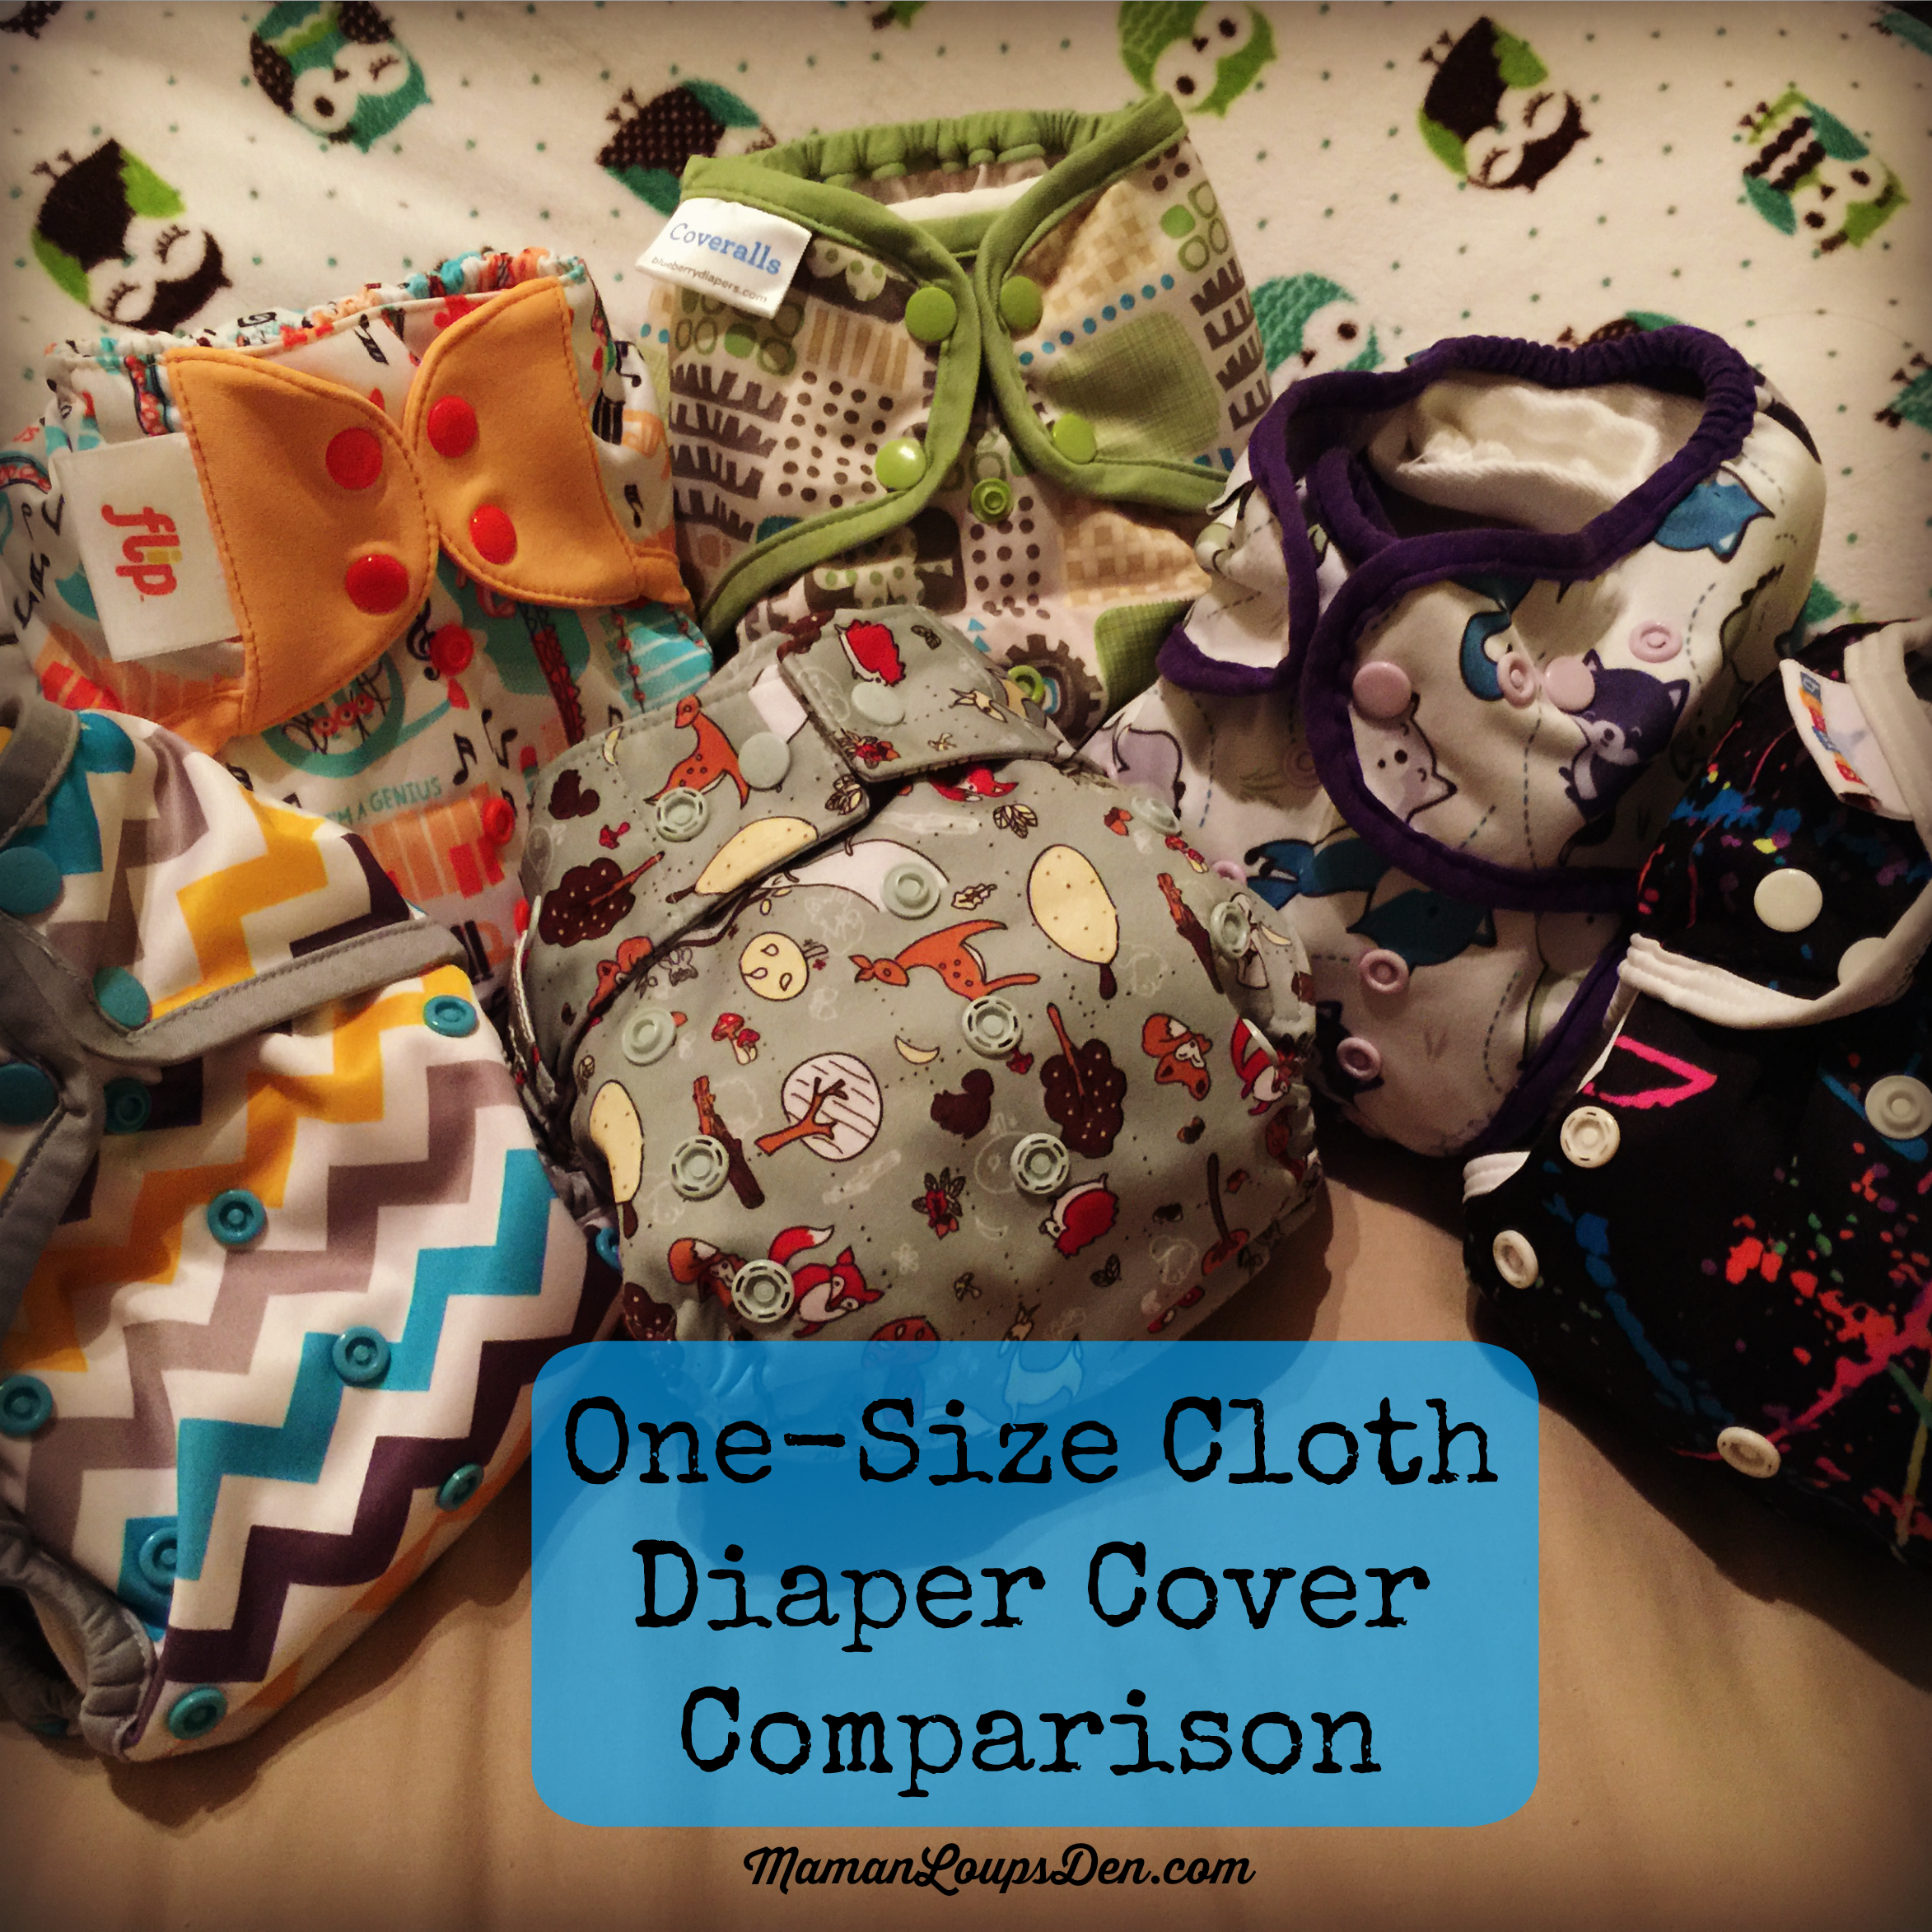 Maman Loup’s Guide to One-Size Diaper Covers